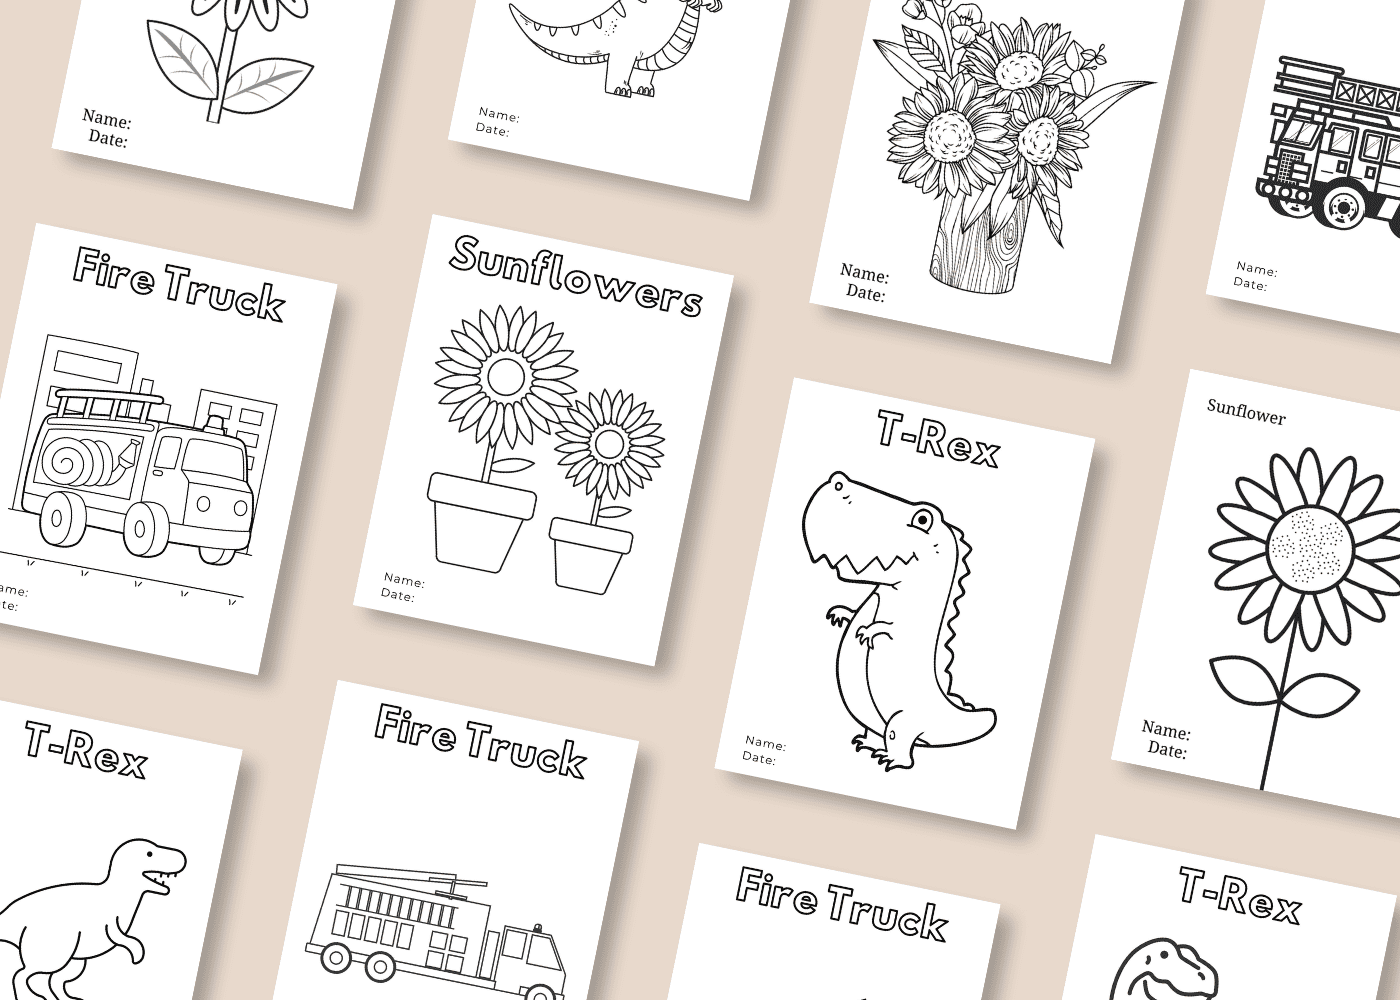 Samples of the free printable kids coloring pages showing fire trucks, t-rex, and sunflowers.